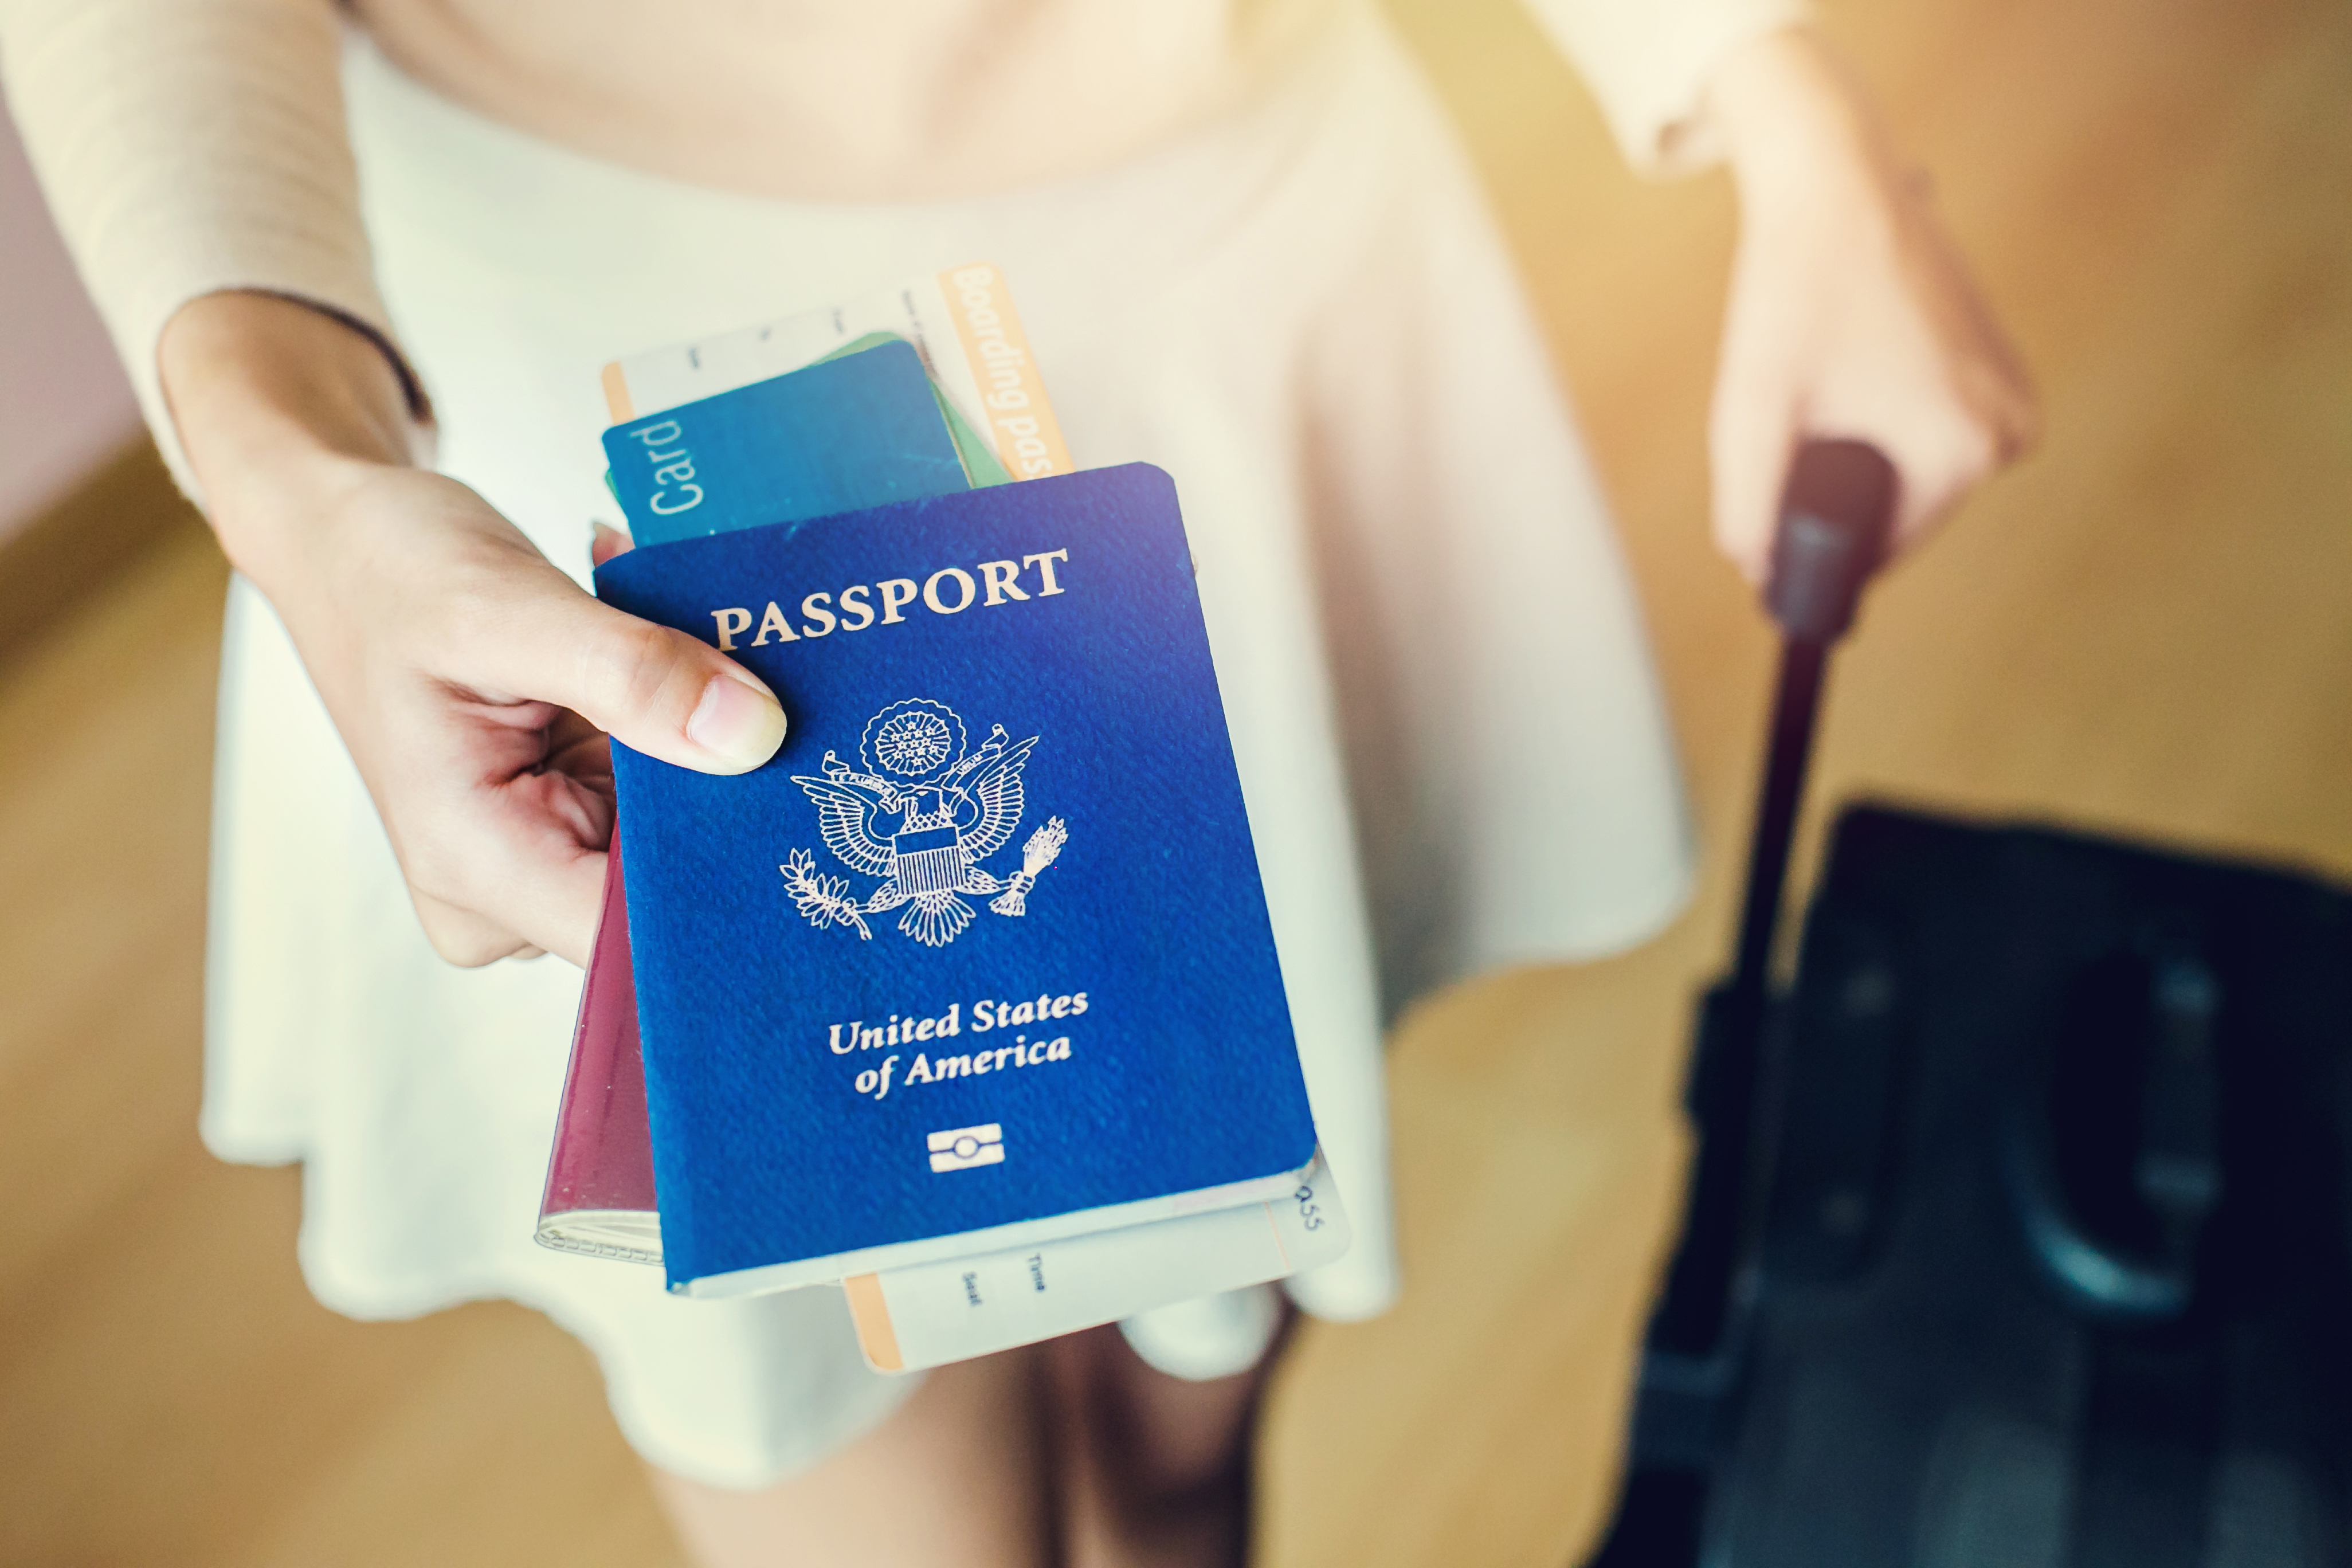 Girl holding passports and boarding pass | Source: Shutterstock